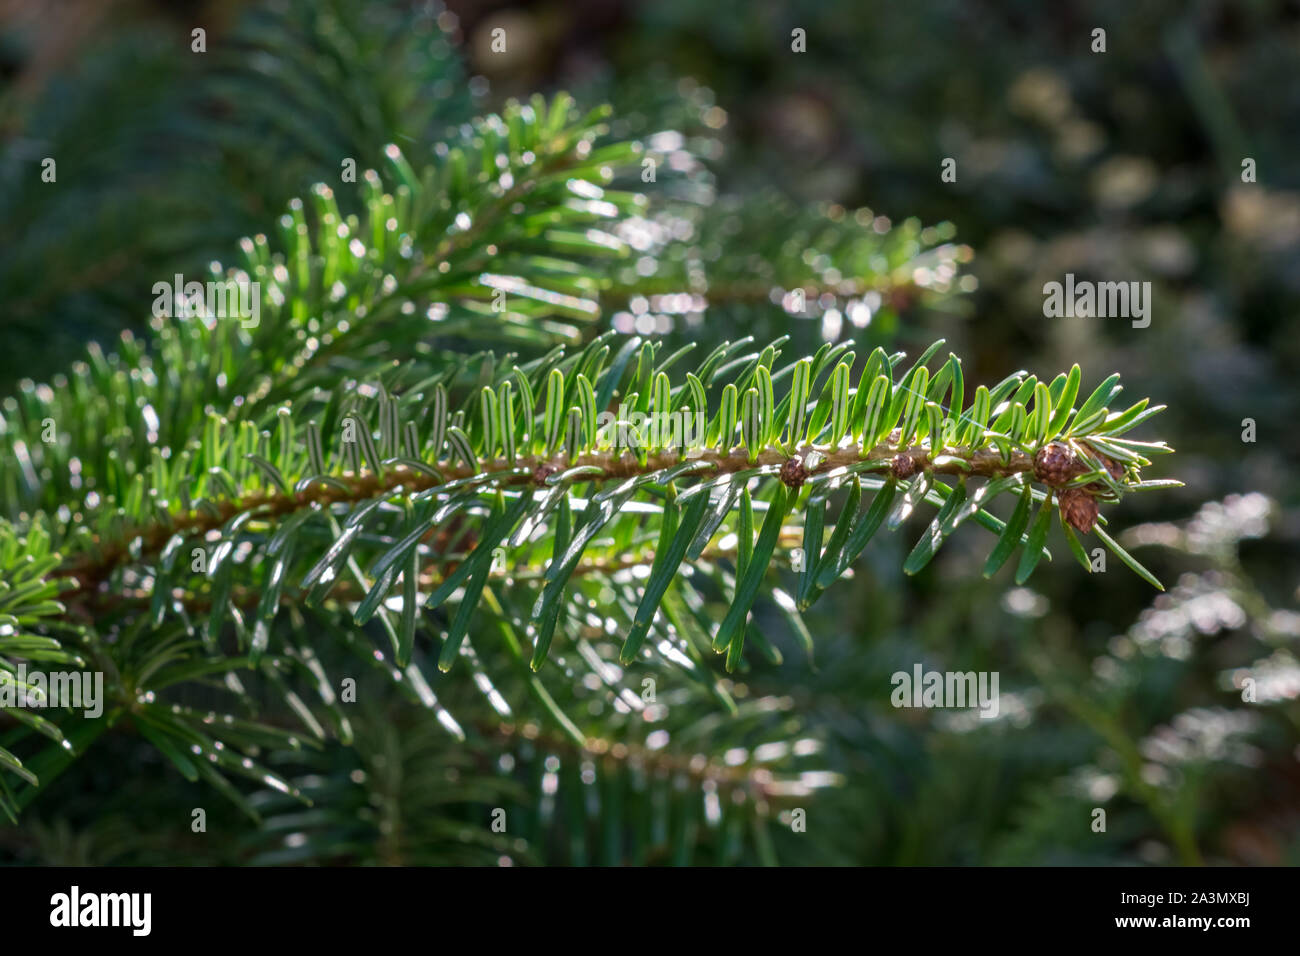 Tip of branch of coniferous tree Nordmann fir or Caucasian fir, Abies nordmanniana. Soft needles, used as Christmas tree. Stock Photo